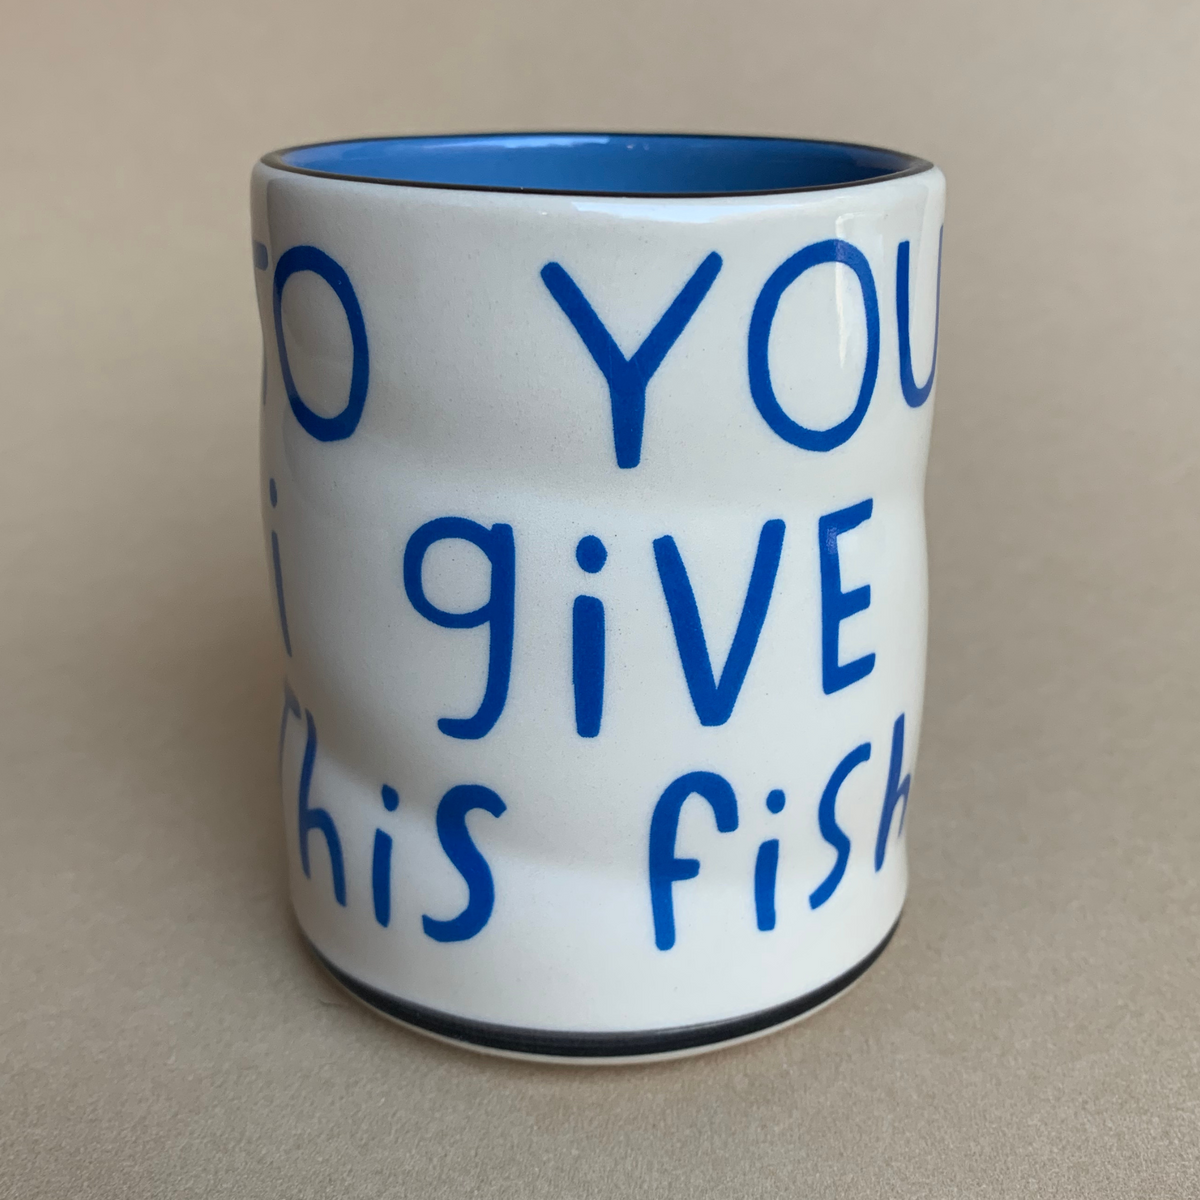 This Fish Spark Cup - Large